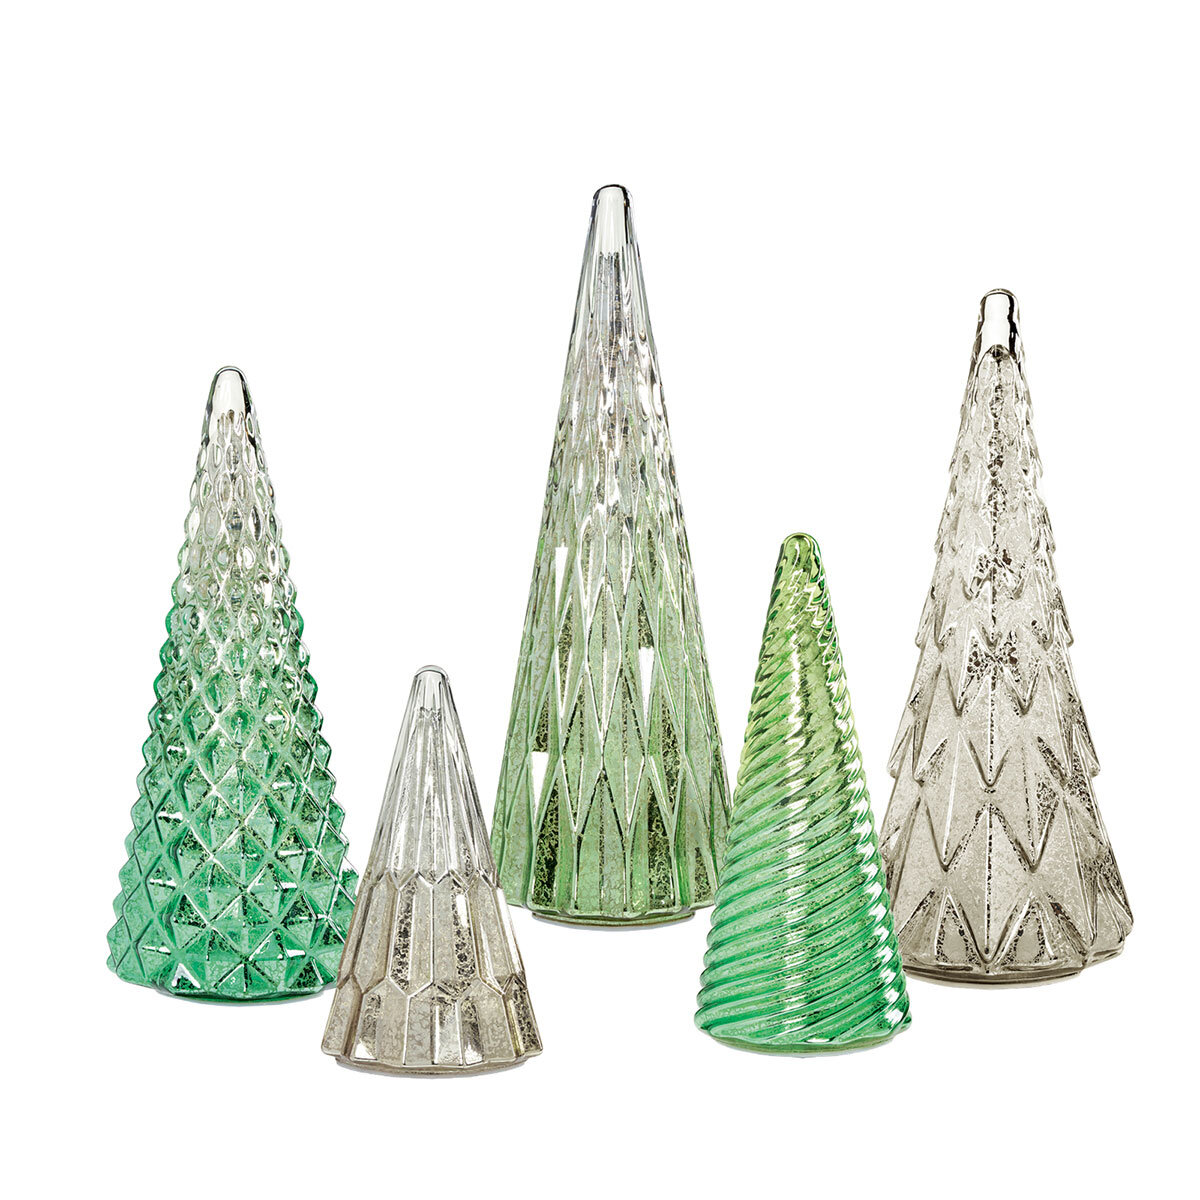 Buy Glass Trees 5 Pack Green Overview Image at Costco.co.uk